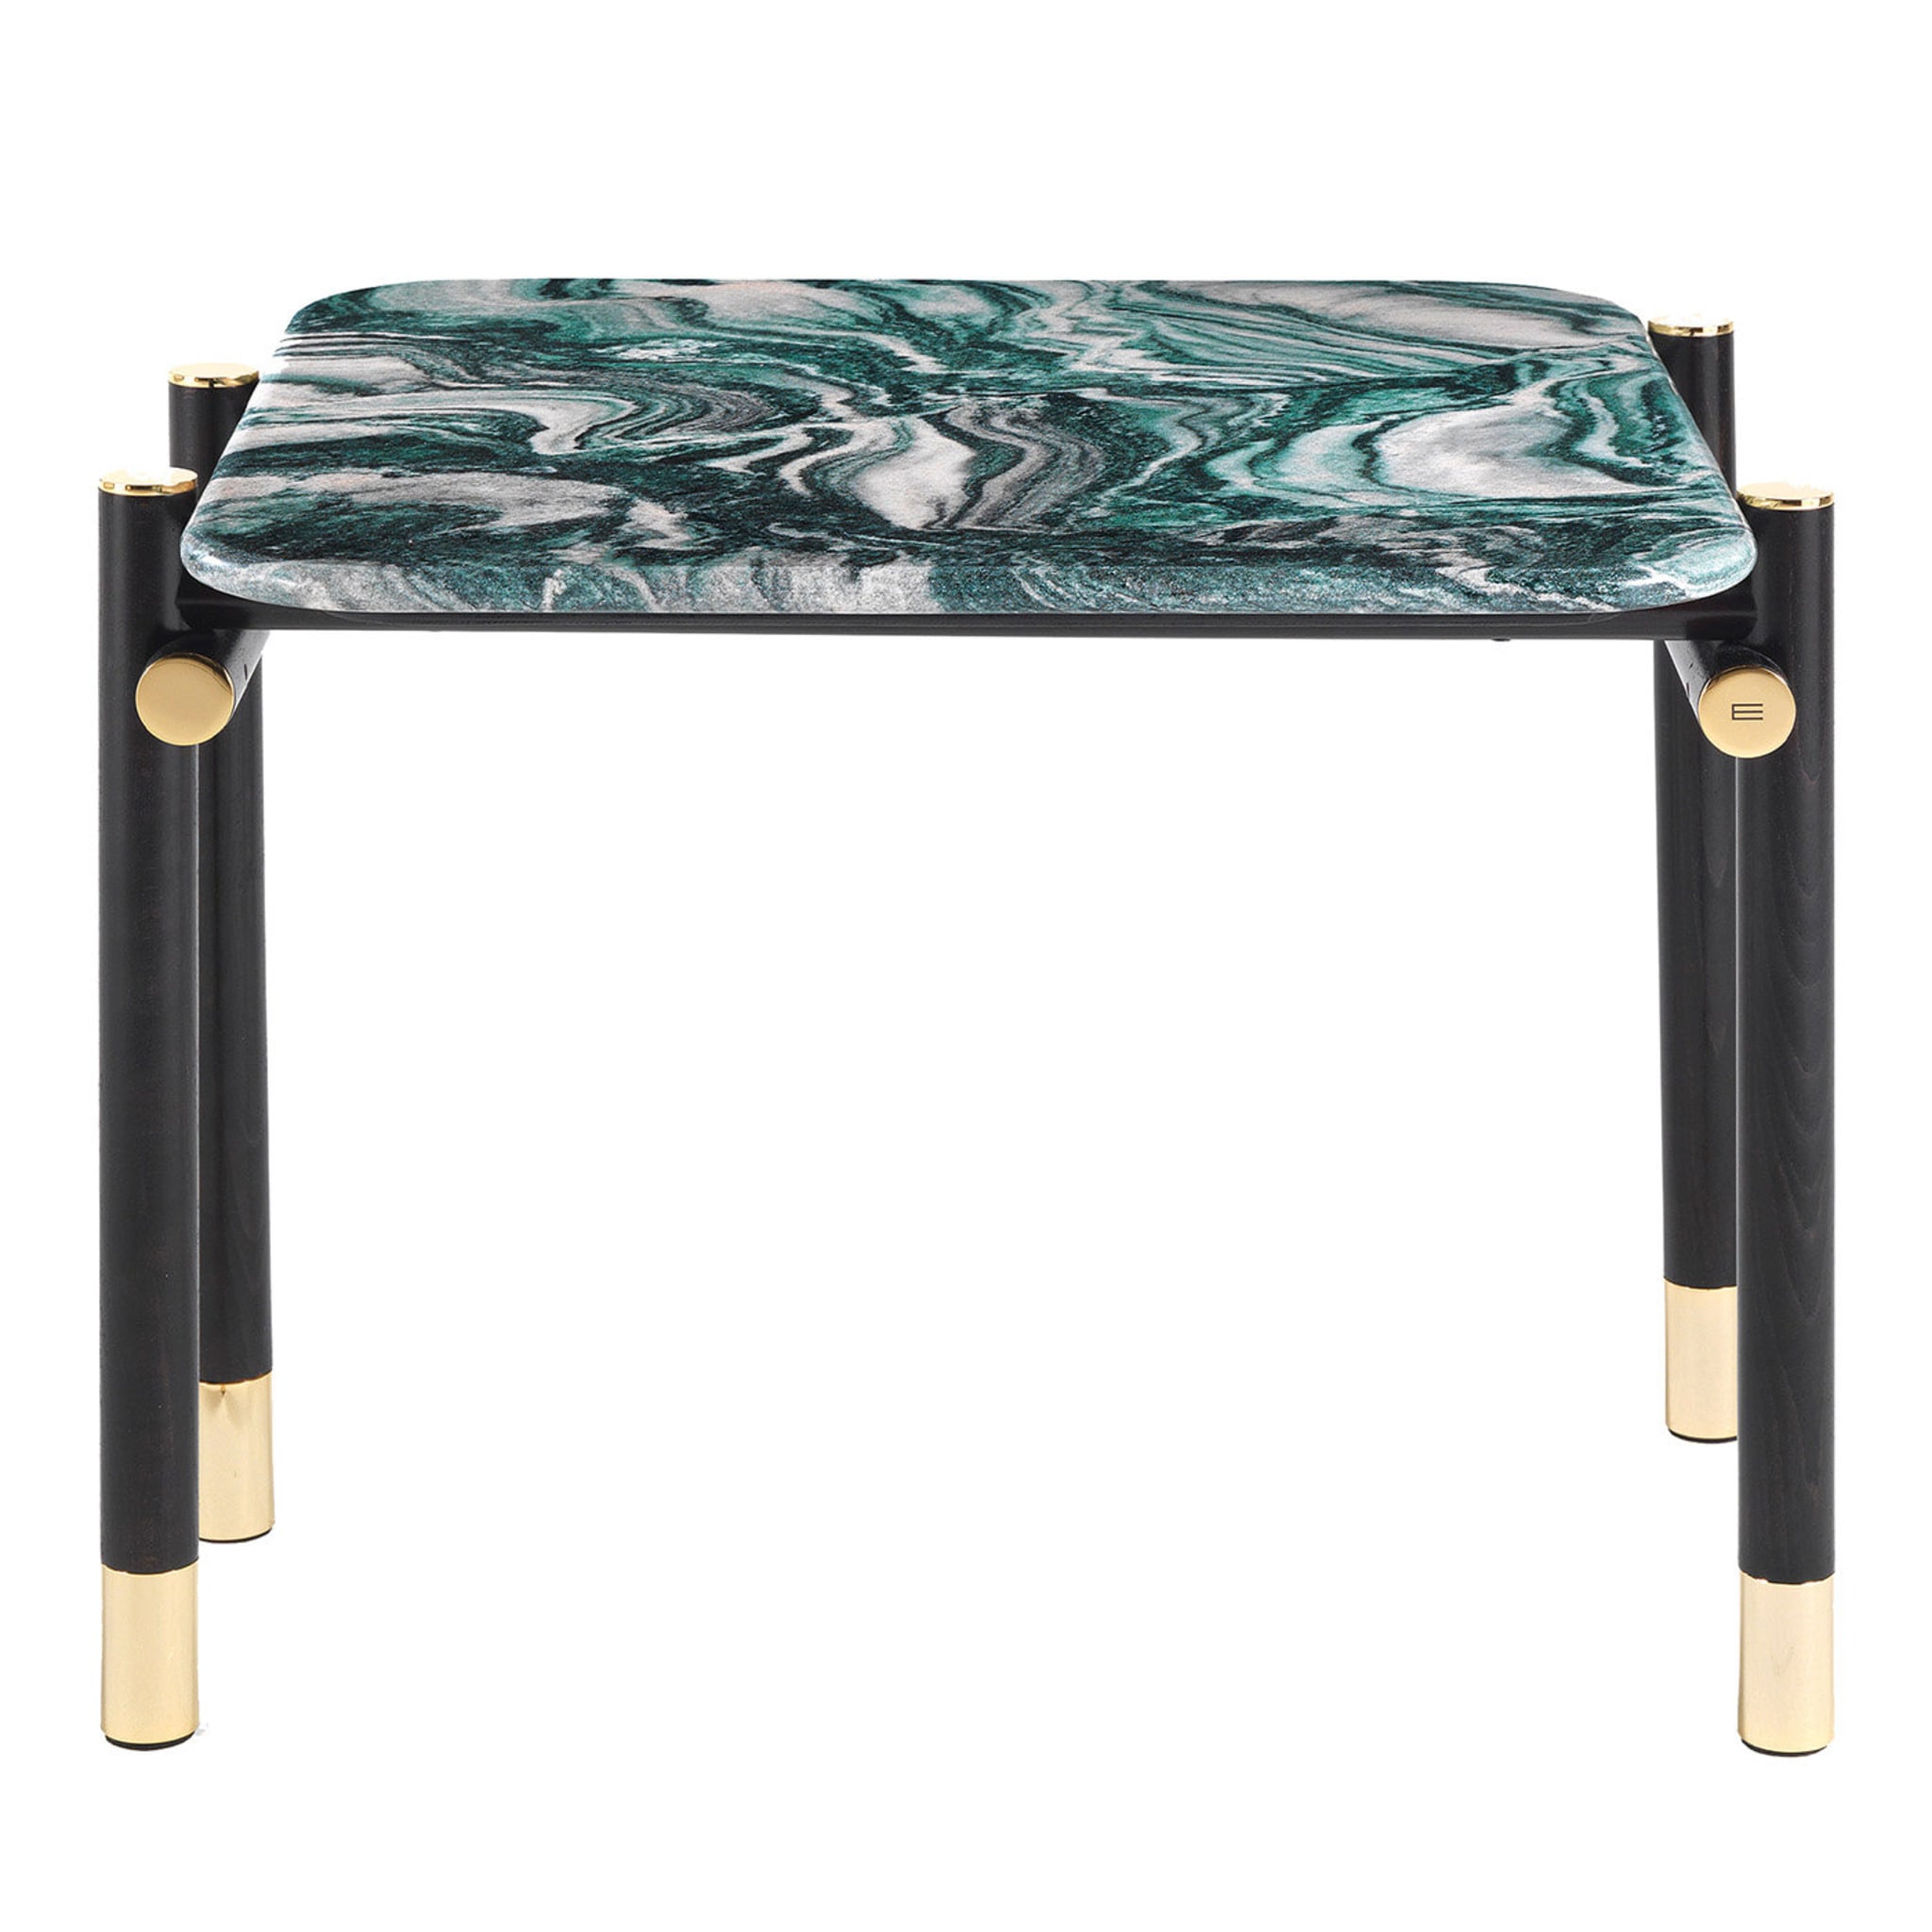 Table d'appoint Woodstock Polar Green - Vue principale